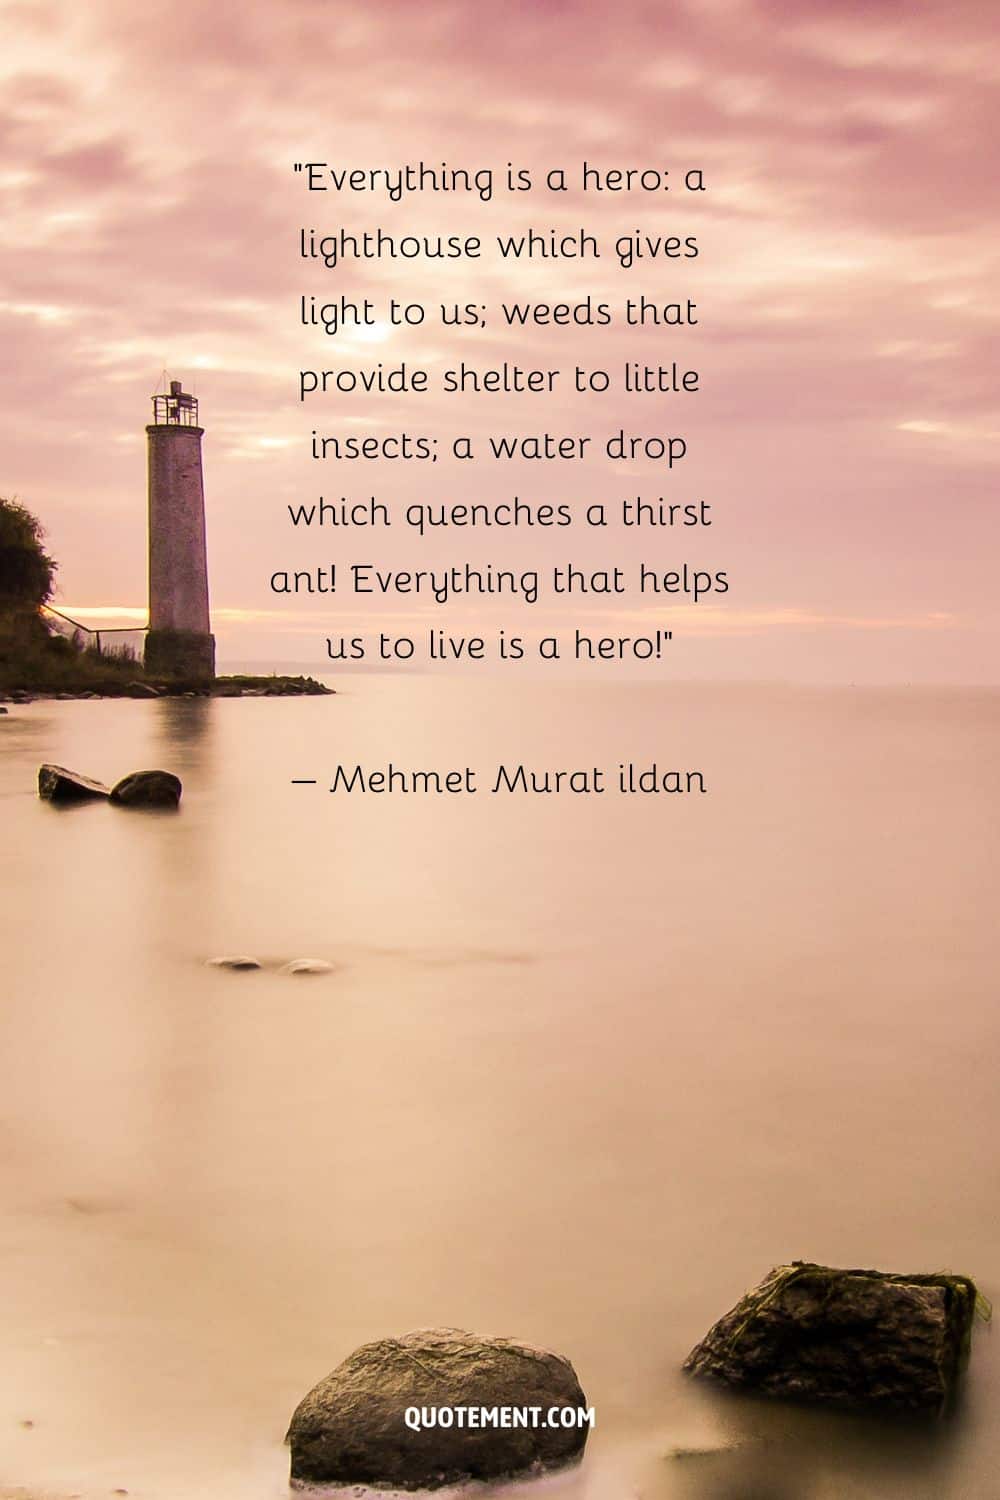 Mind-blowing quote by Mehmet Murat ildan and a lighthouse in the background